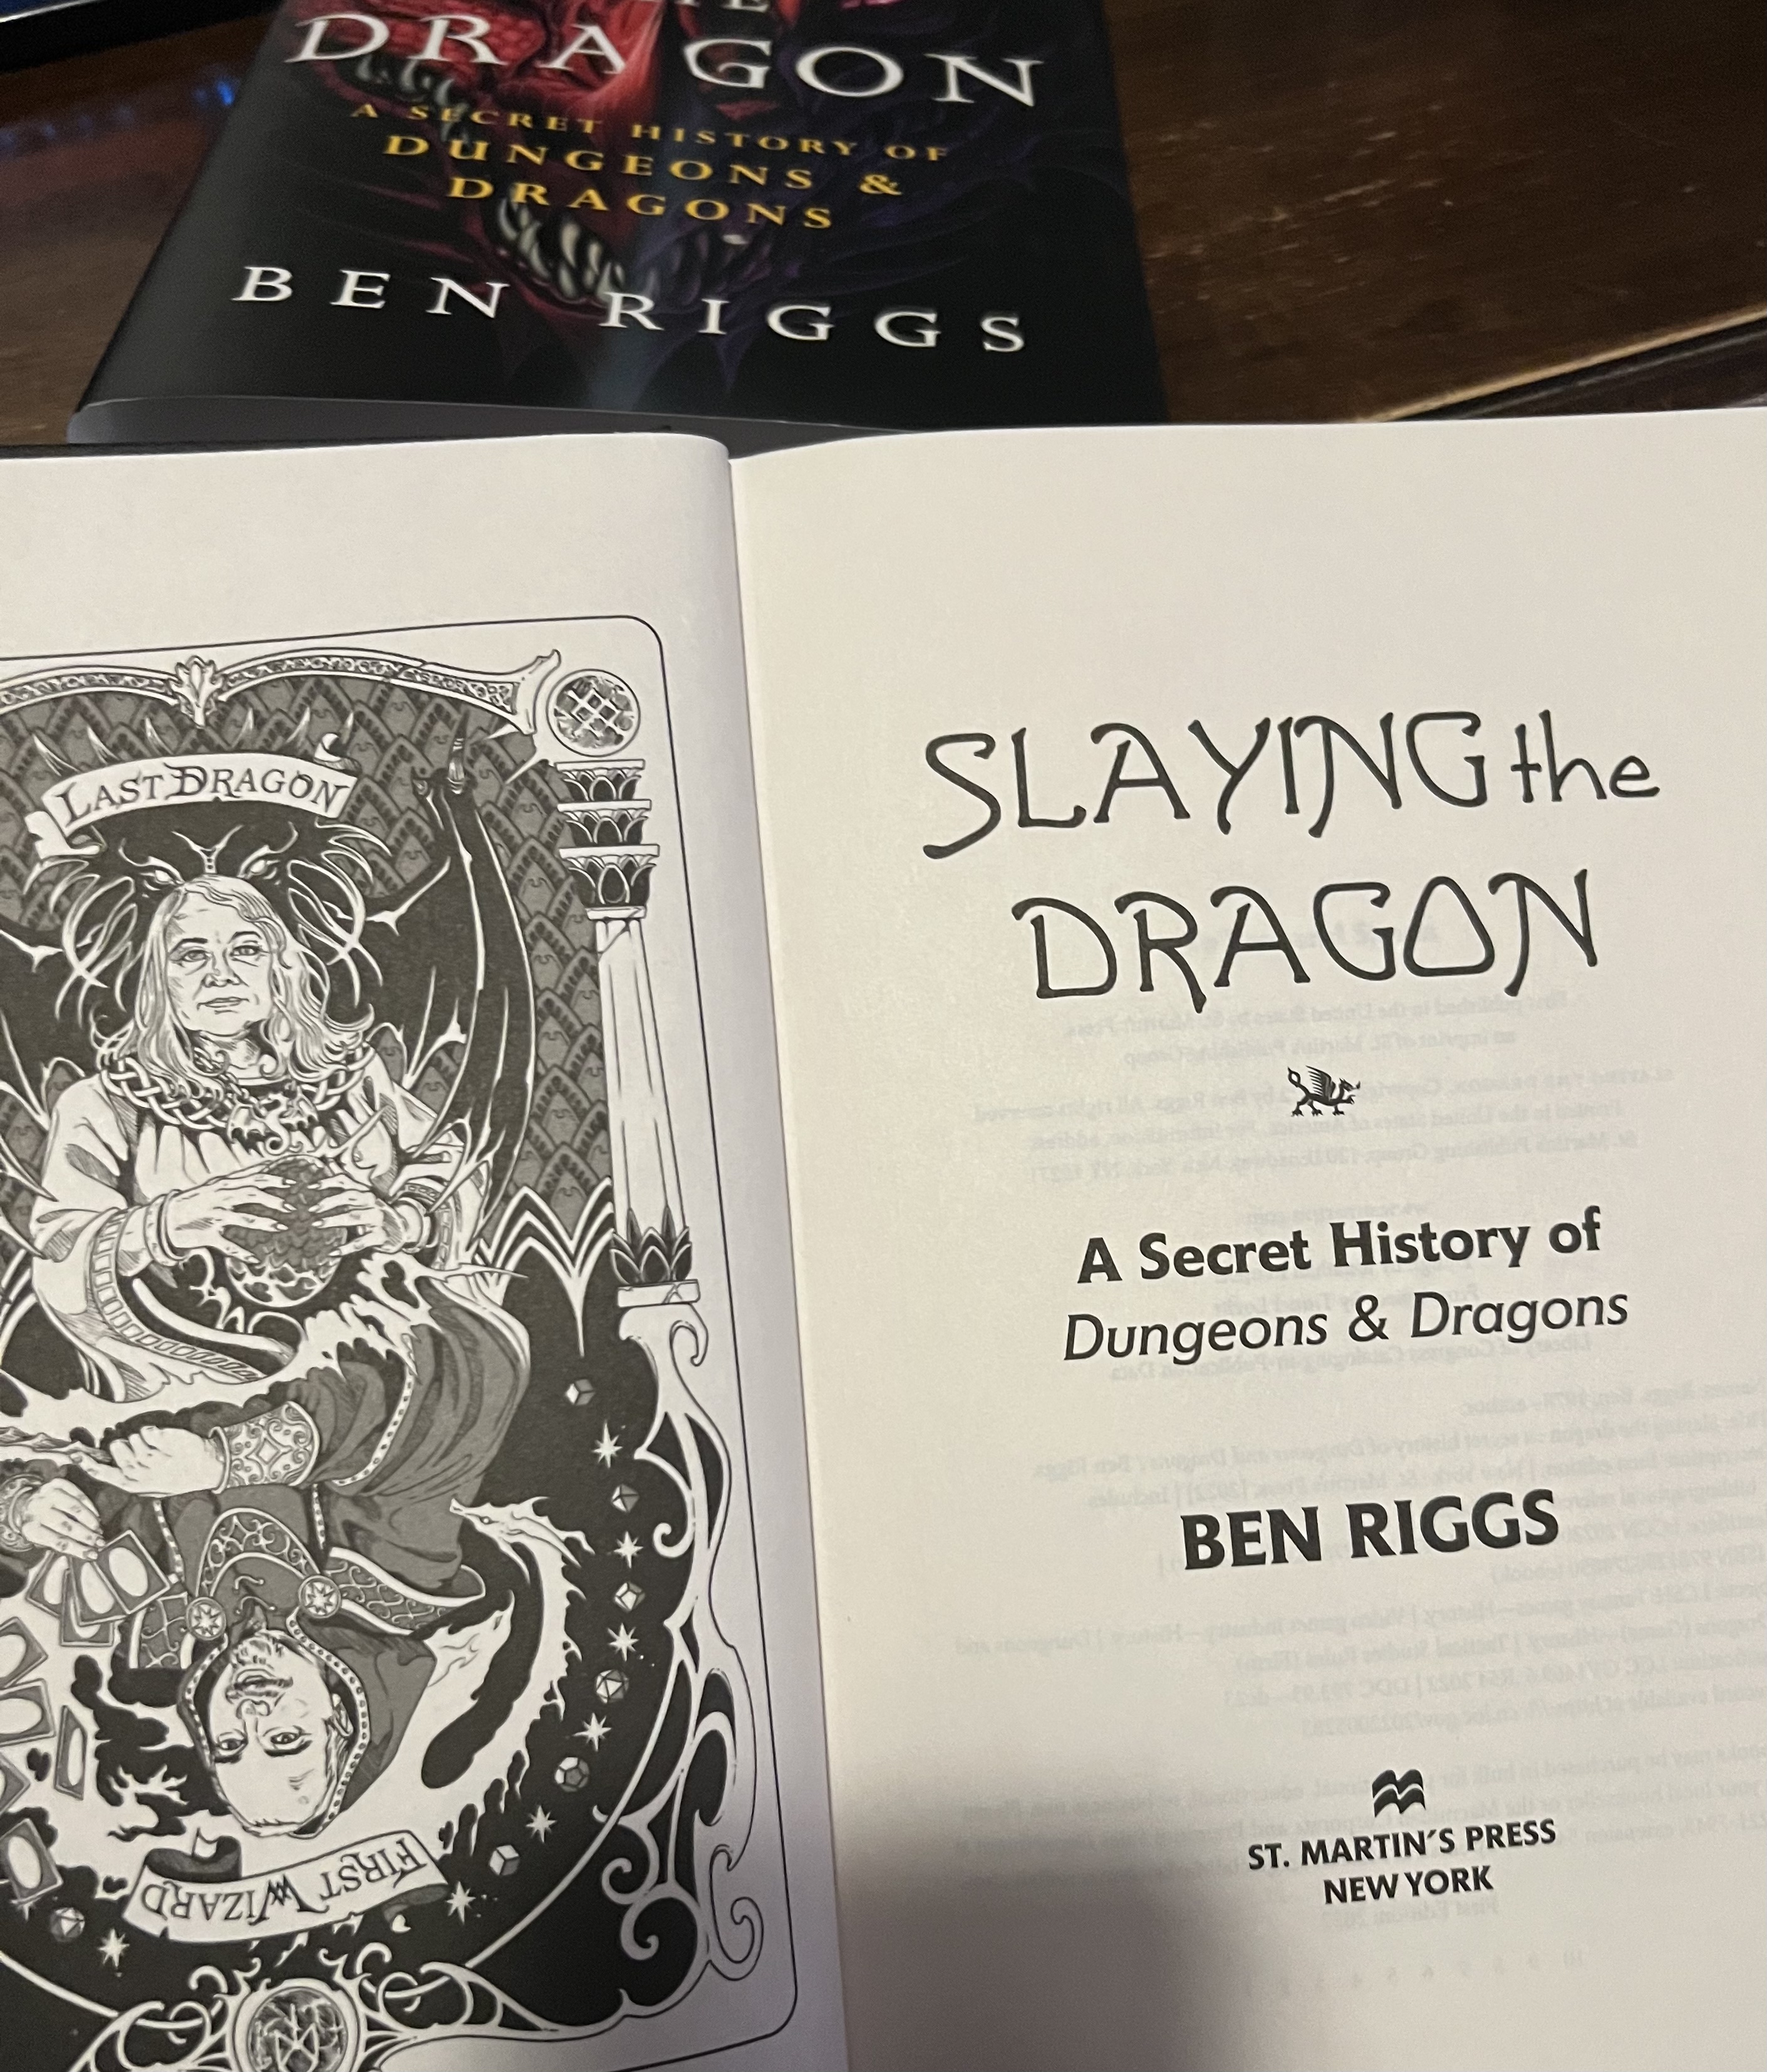 Ben Riggs book: Slaying the Dragon. With an illustration in the inside title page of Lorraine Williams as the top half of a playing card labeled, Last Dragon, and Peter Adkinson on the flip side labeled, First Wizard. Slaying the Dragon a book by Ben Riggs from St. Martin Press.